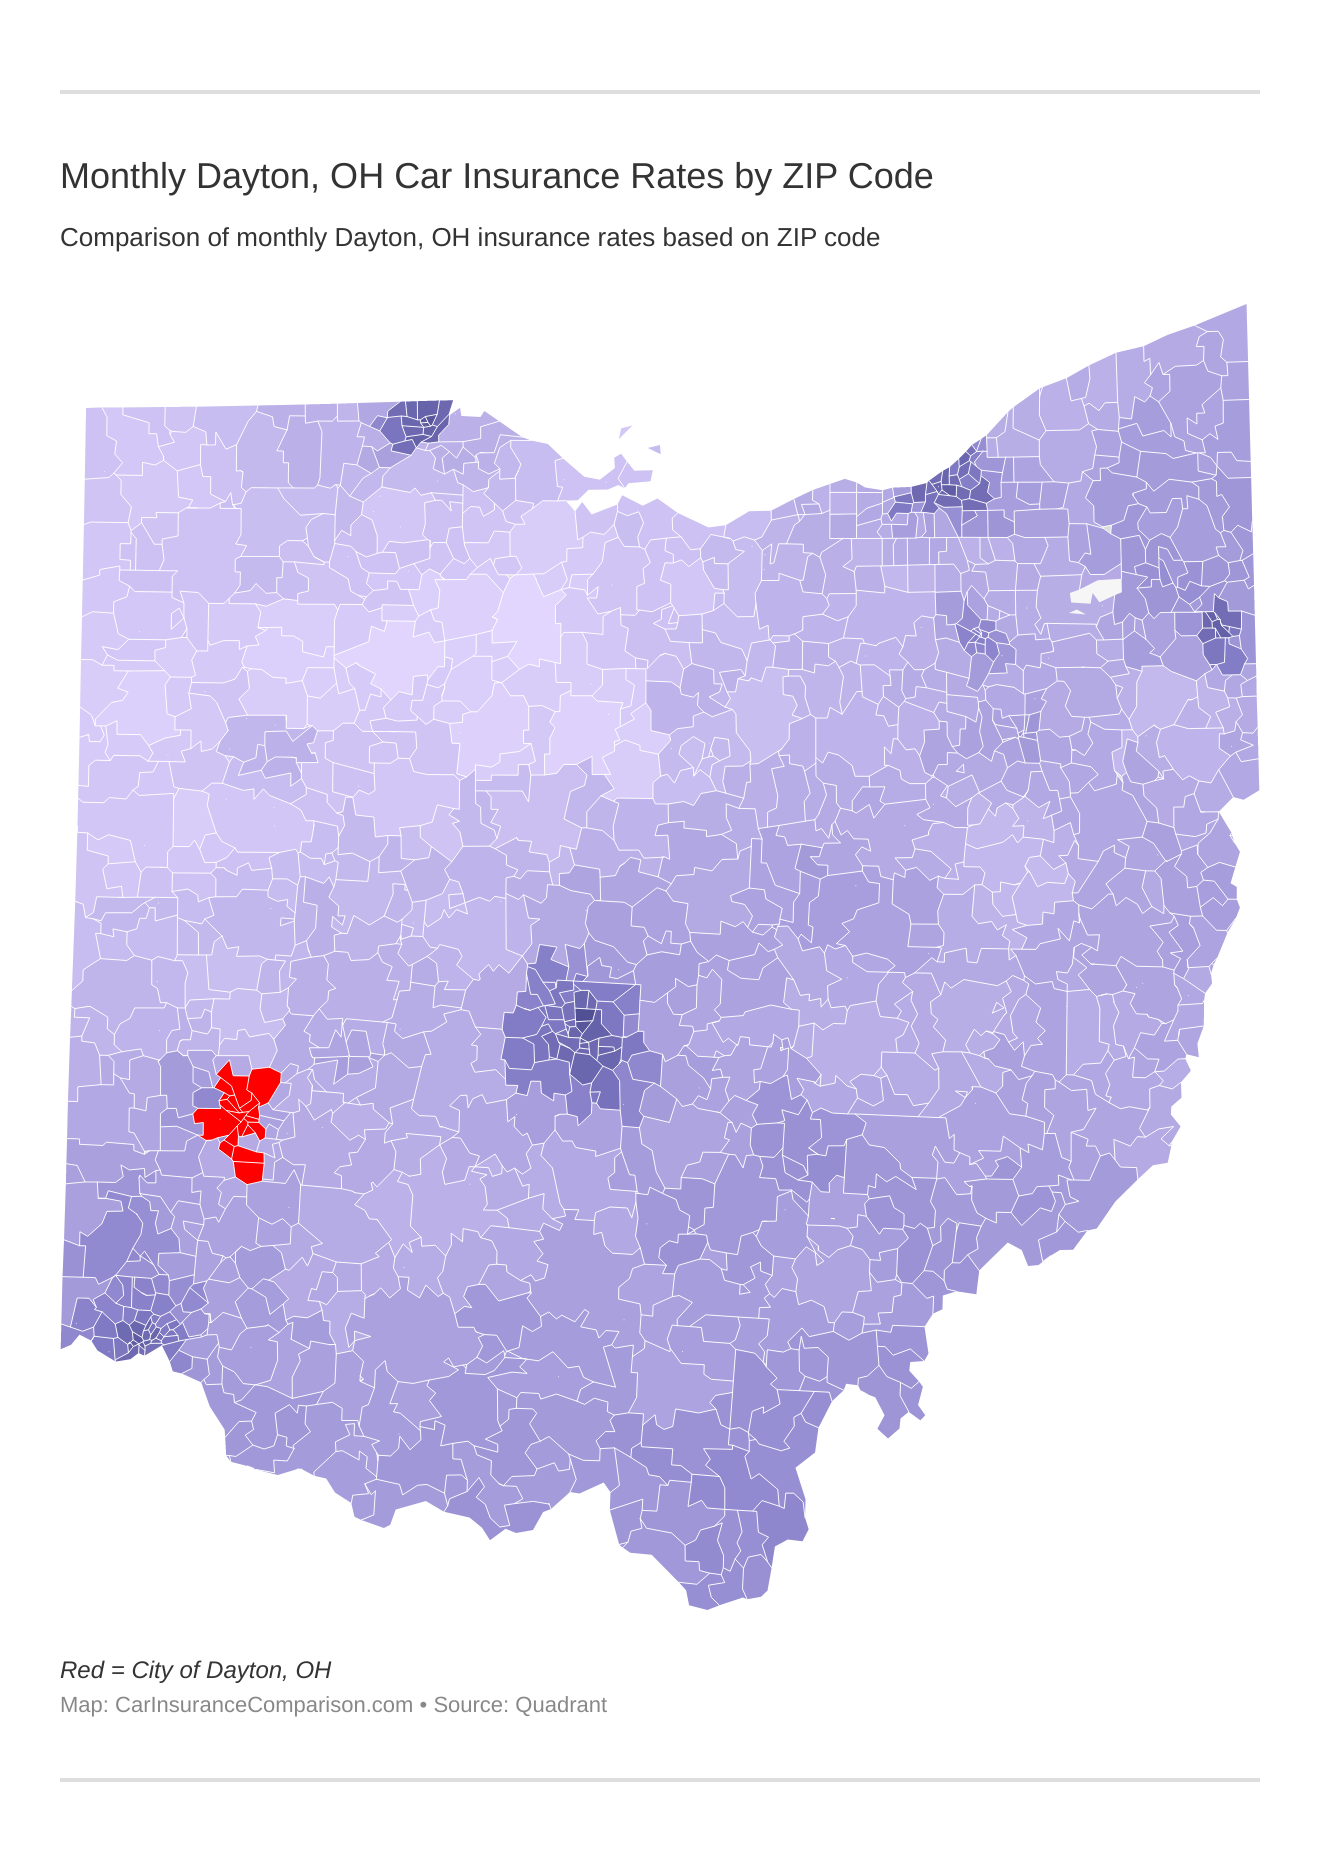 Monthly Dayton, OH Car Insurance Rates by ZIP Code